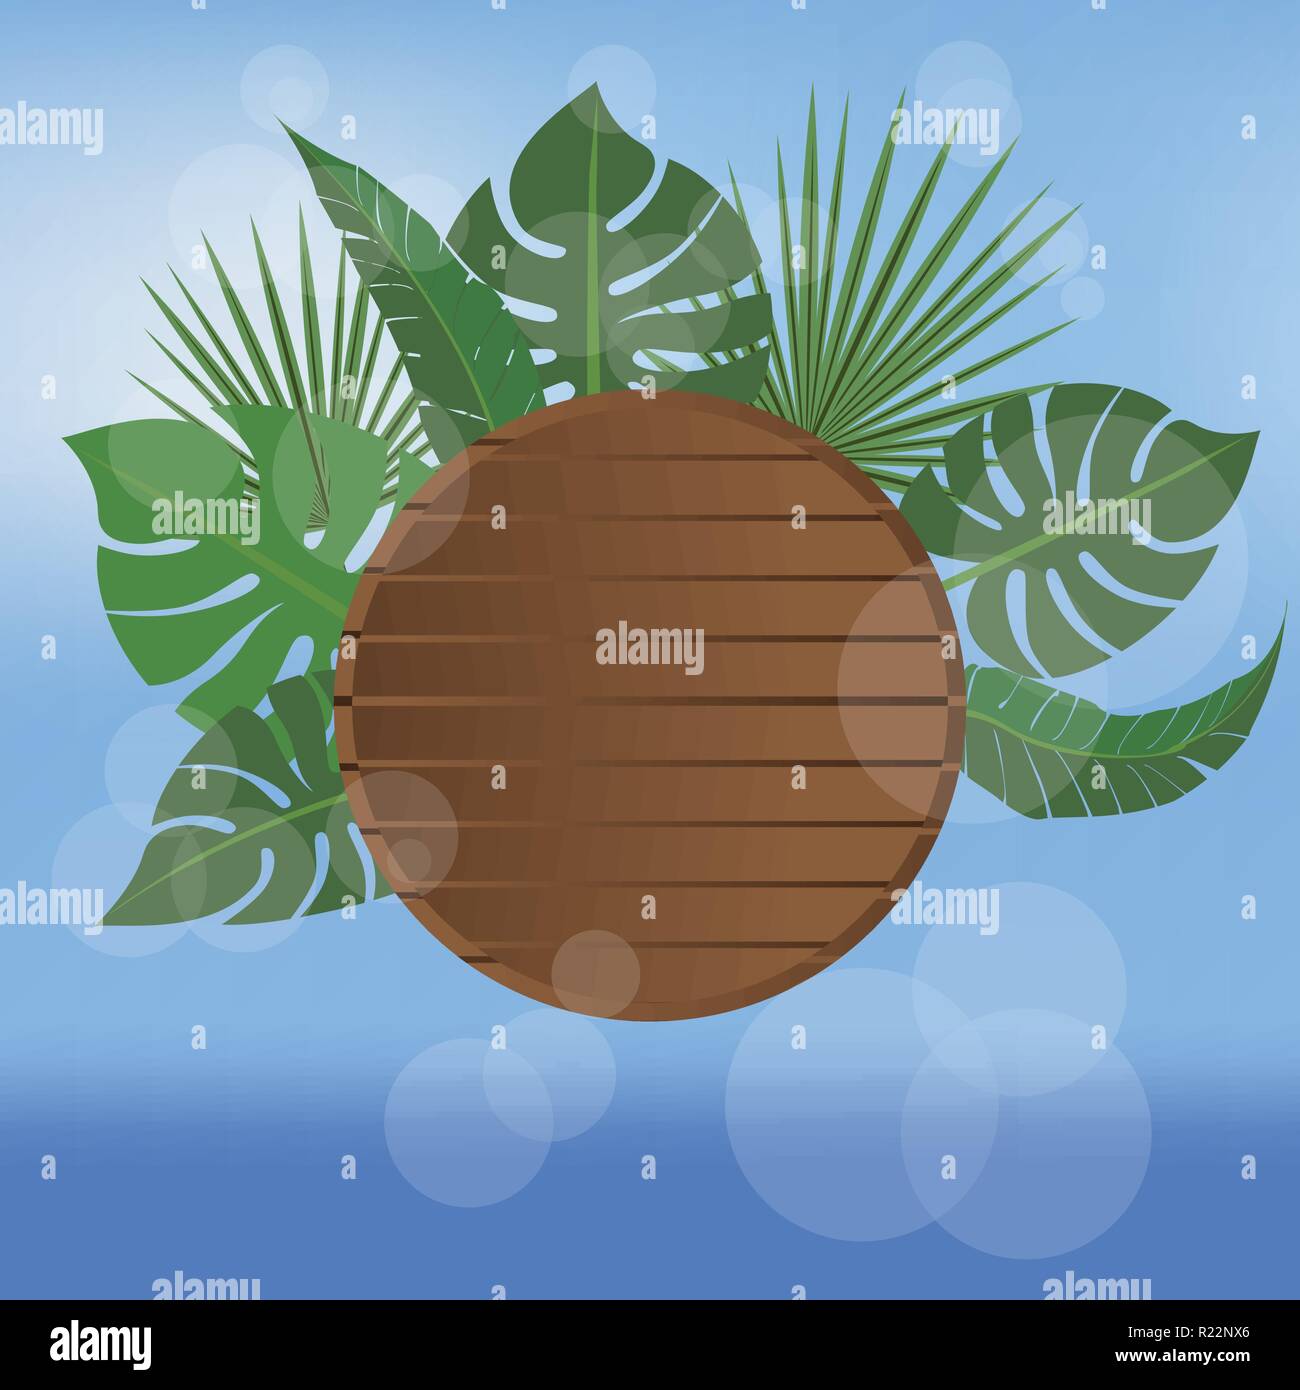 Summer Banner Beach Style Vector Illustration Wood Desk And